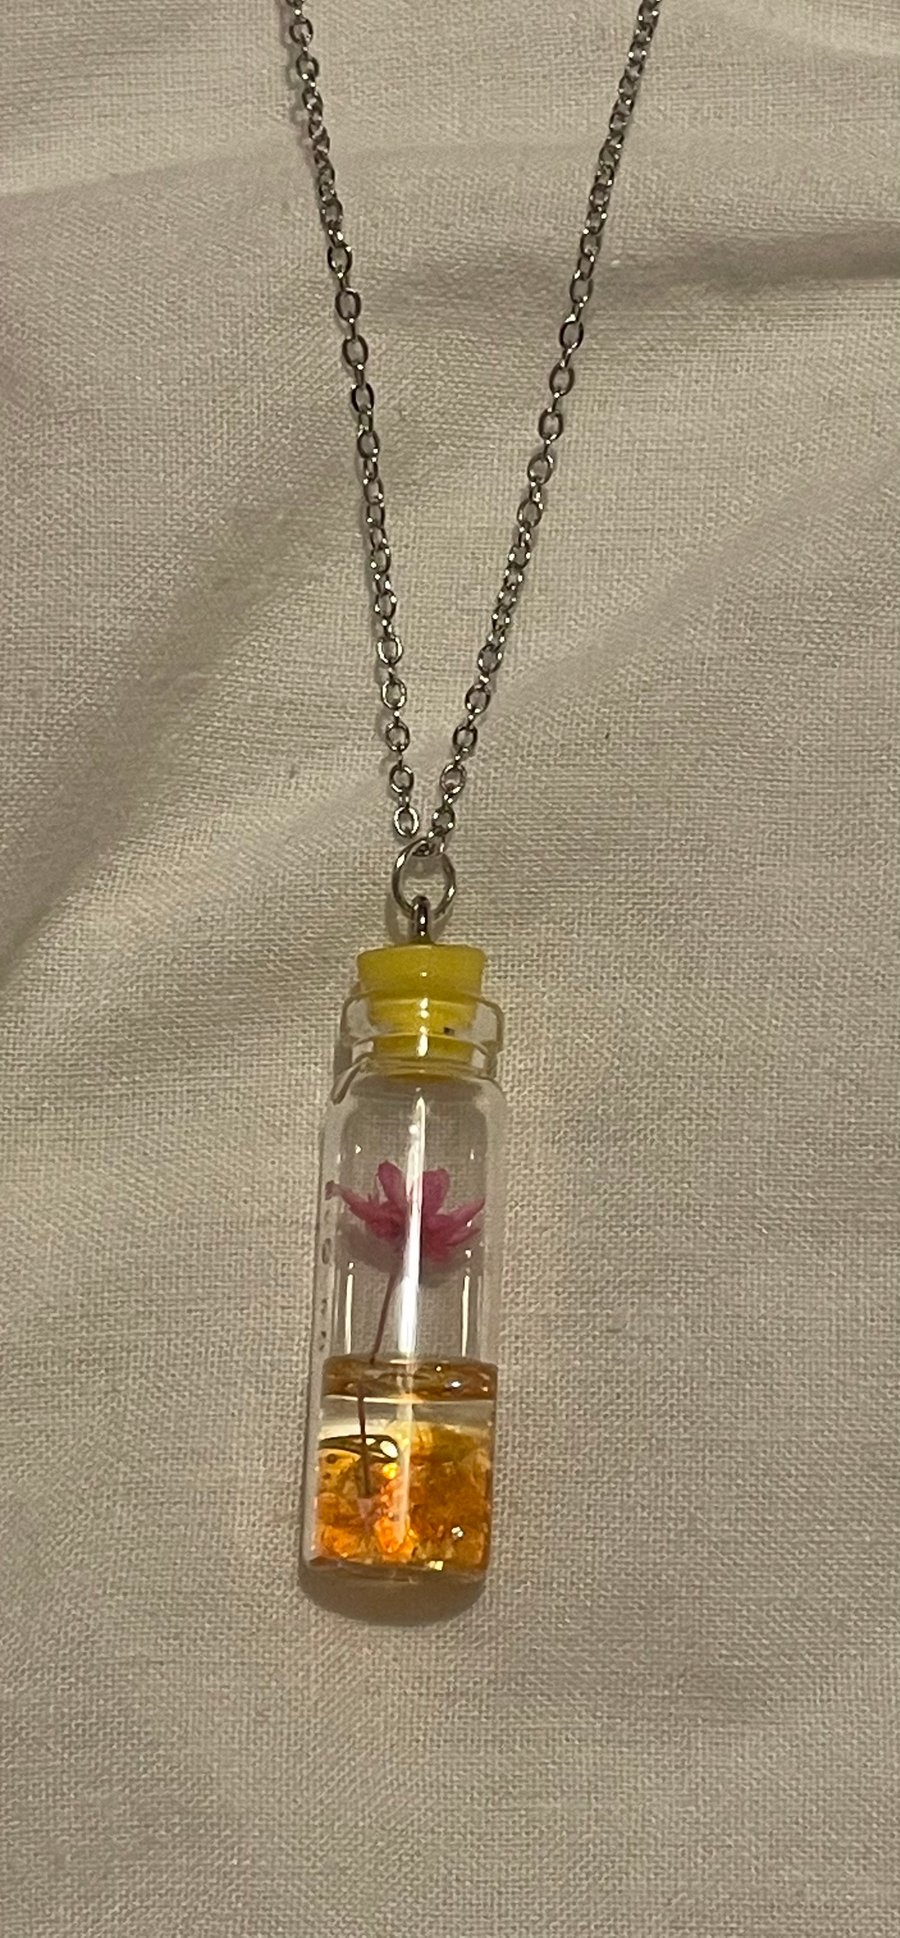 Stella - yellow fairytale necklace